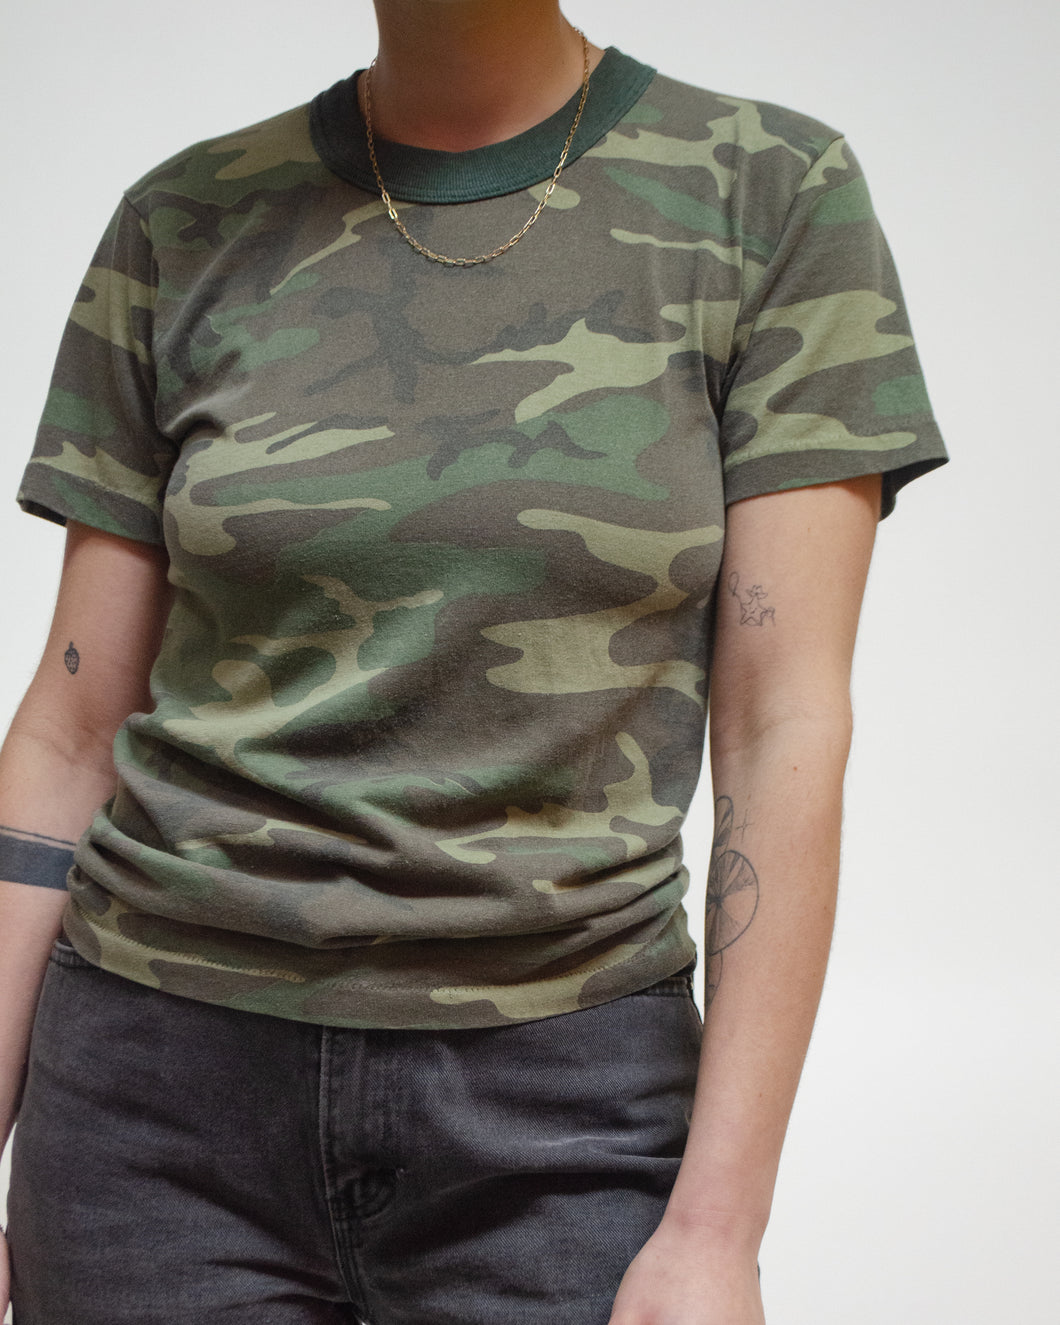 The perfect camo t-shirt